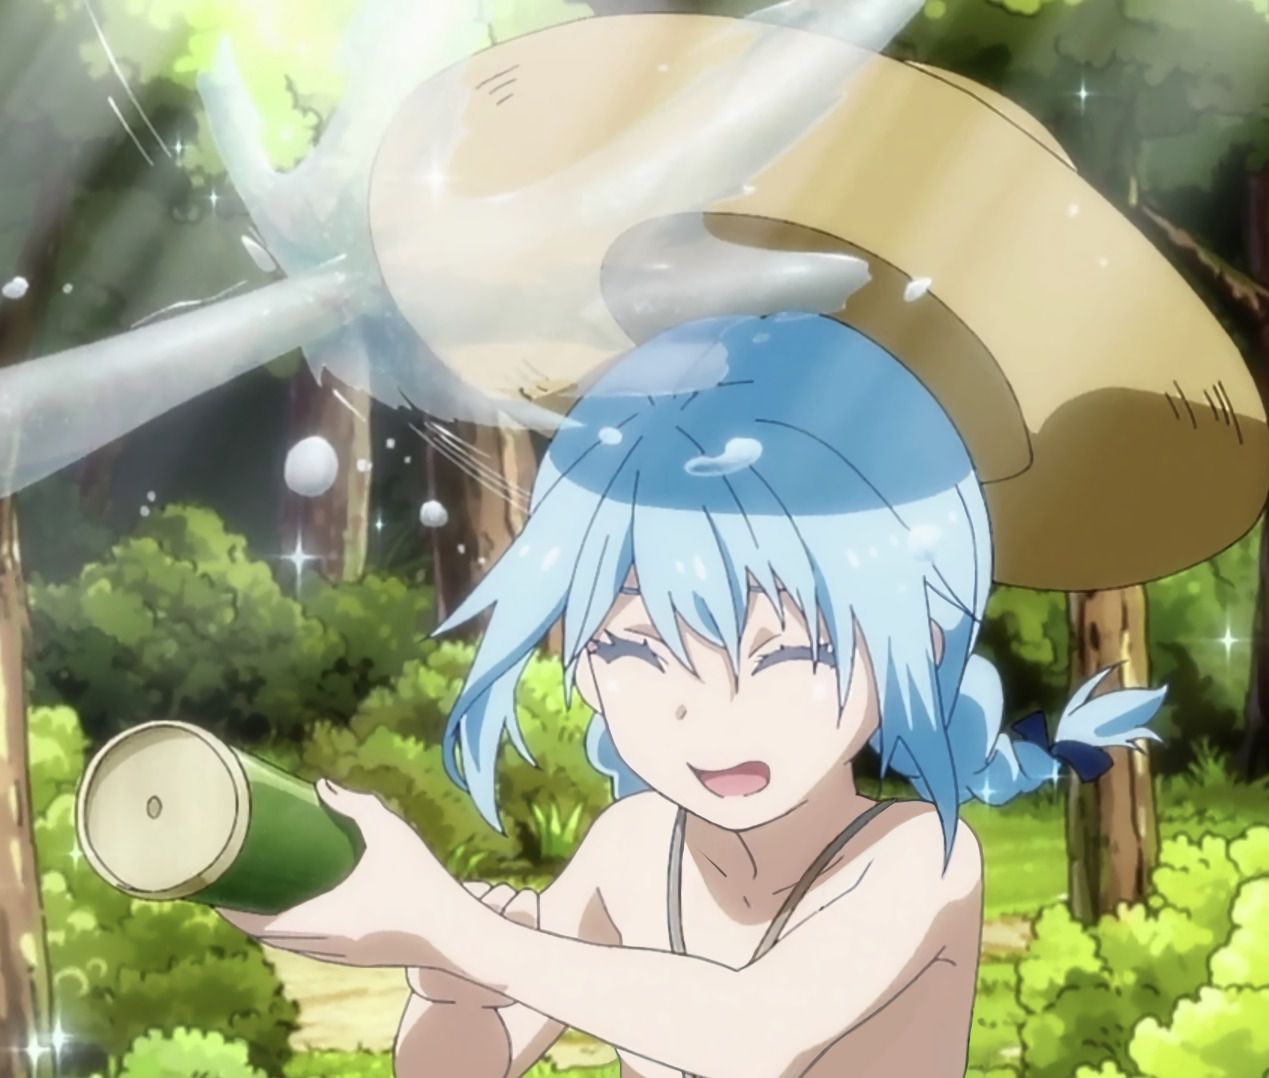 [Peeling Kora] dropping a large amount of peeling kora images such as anime official pictures Part 424 8